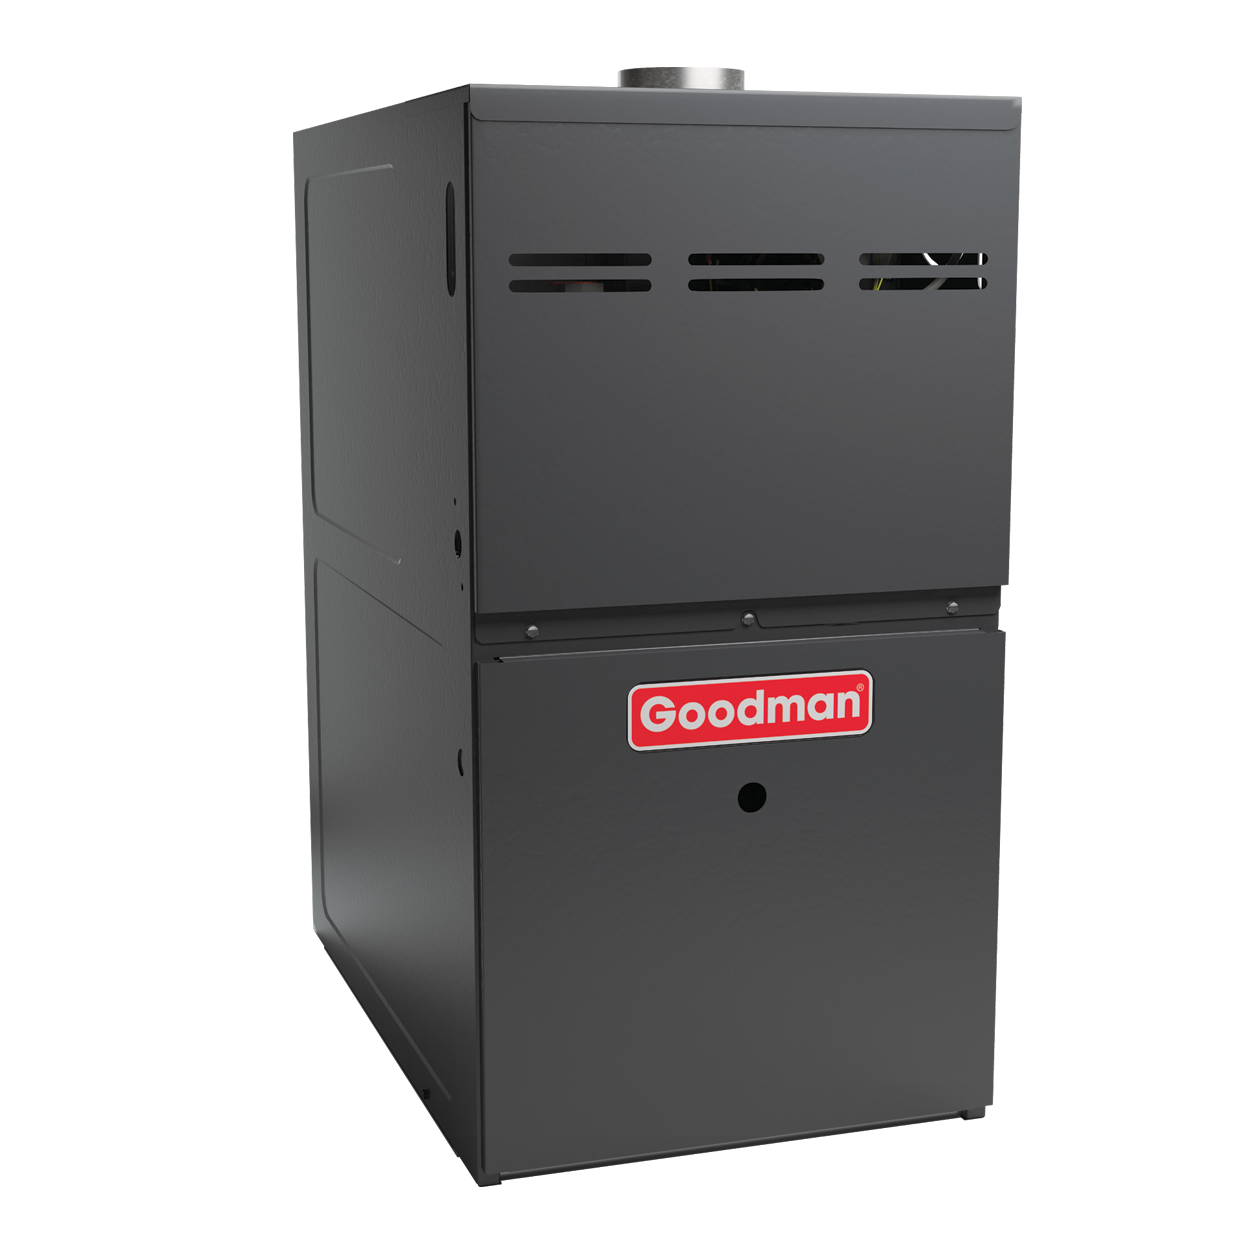 What gas furnaces are rated highest by consumer reviews?